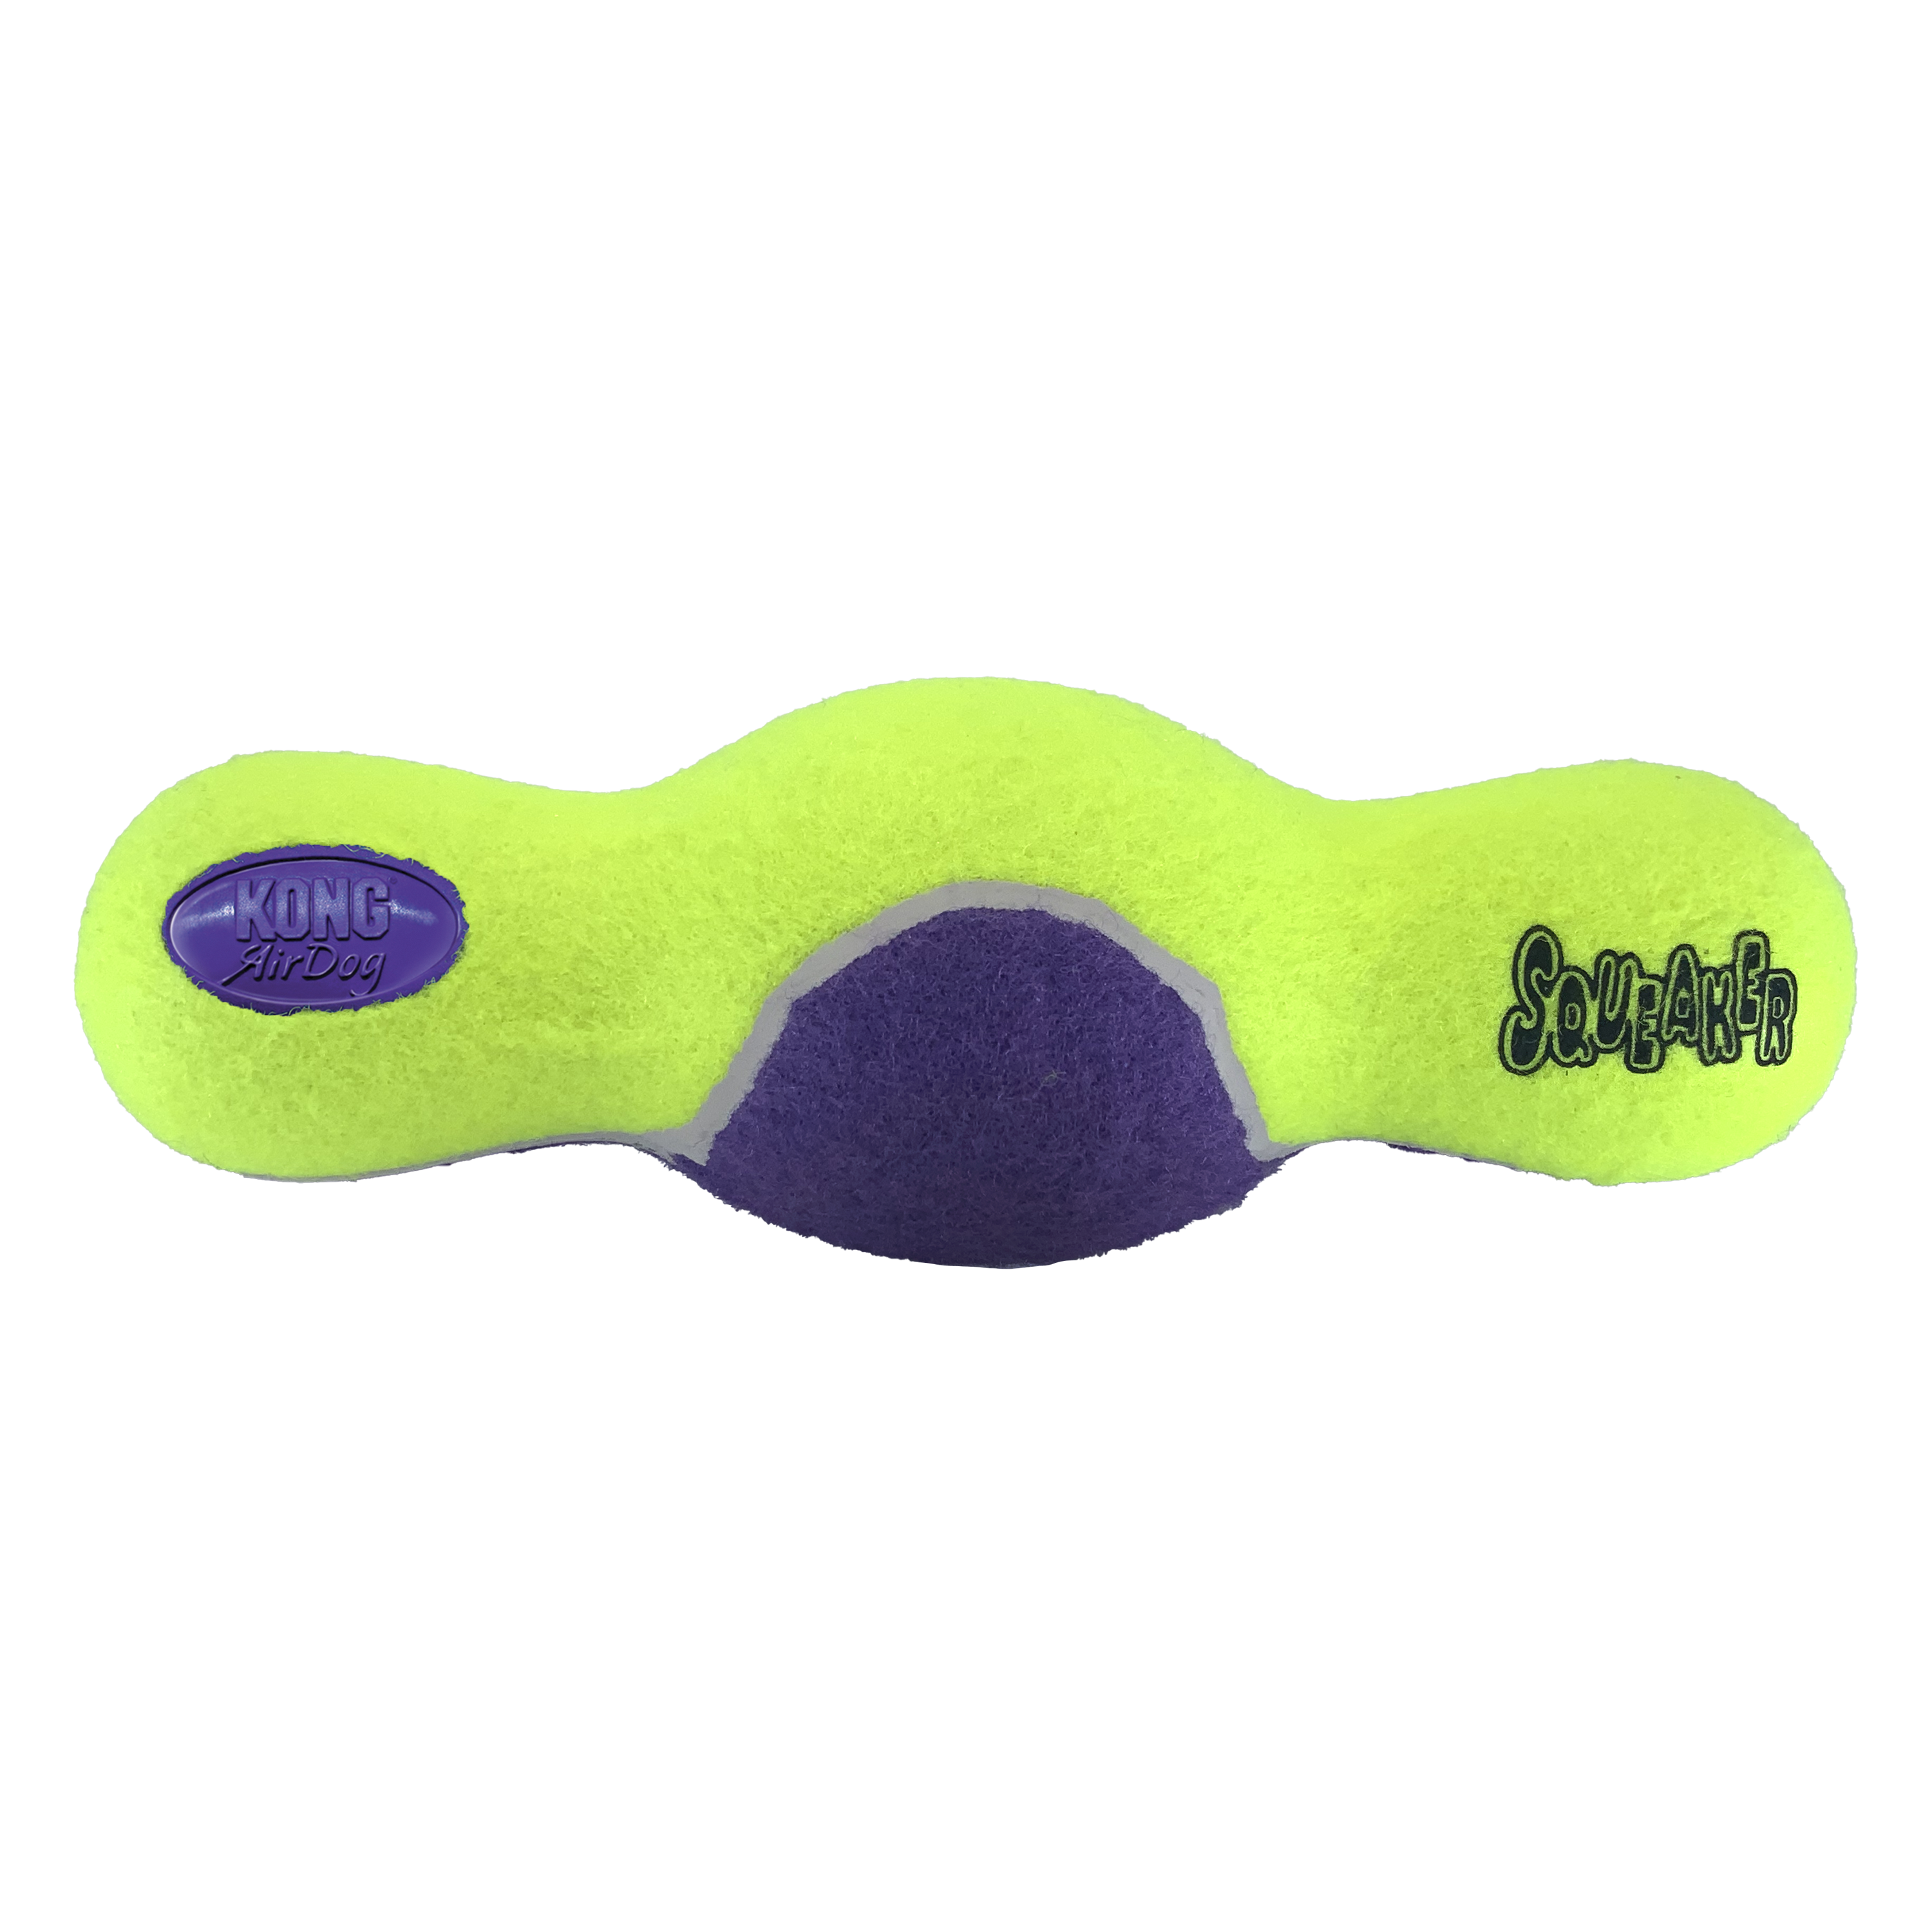 AirDog Squeaker Roller offpack product image